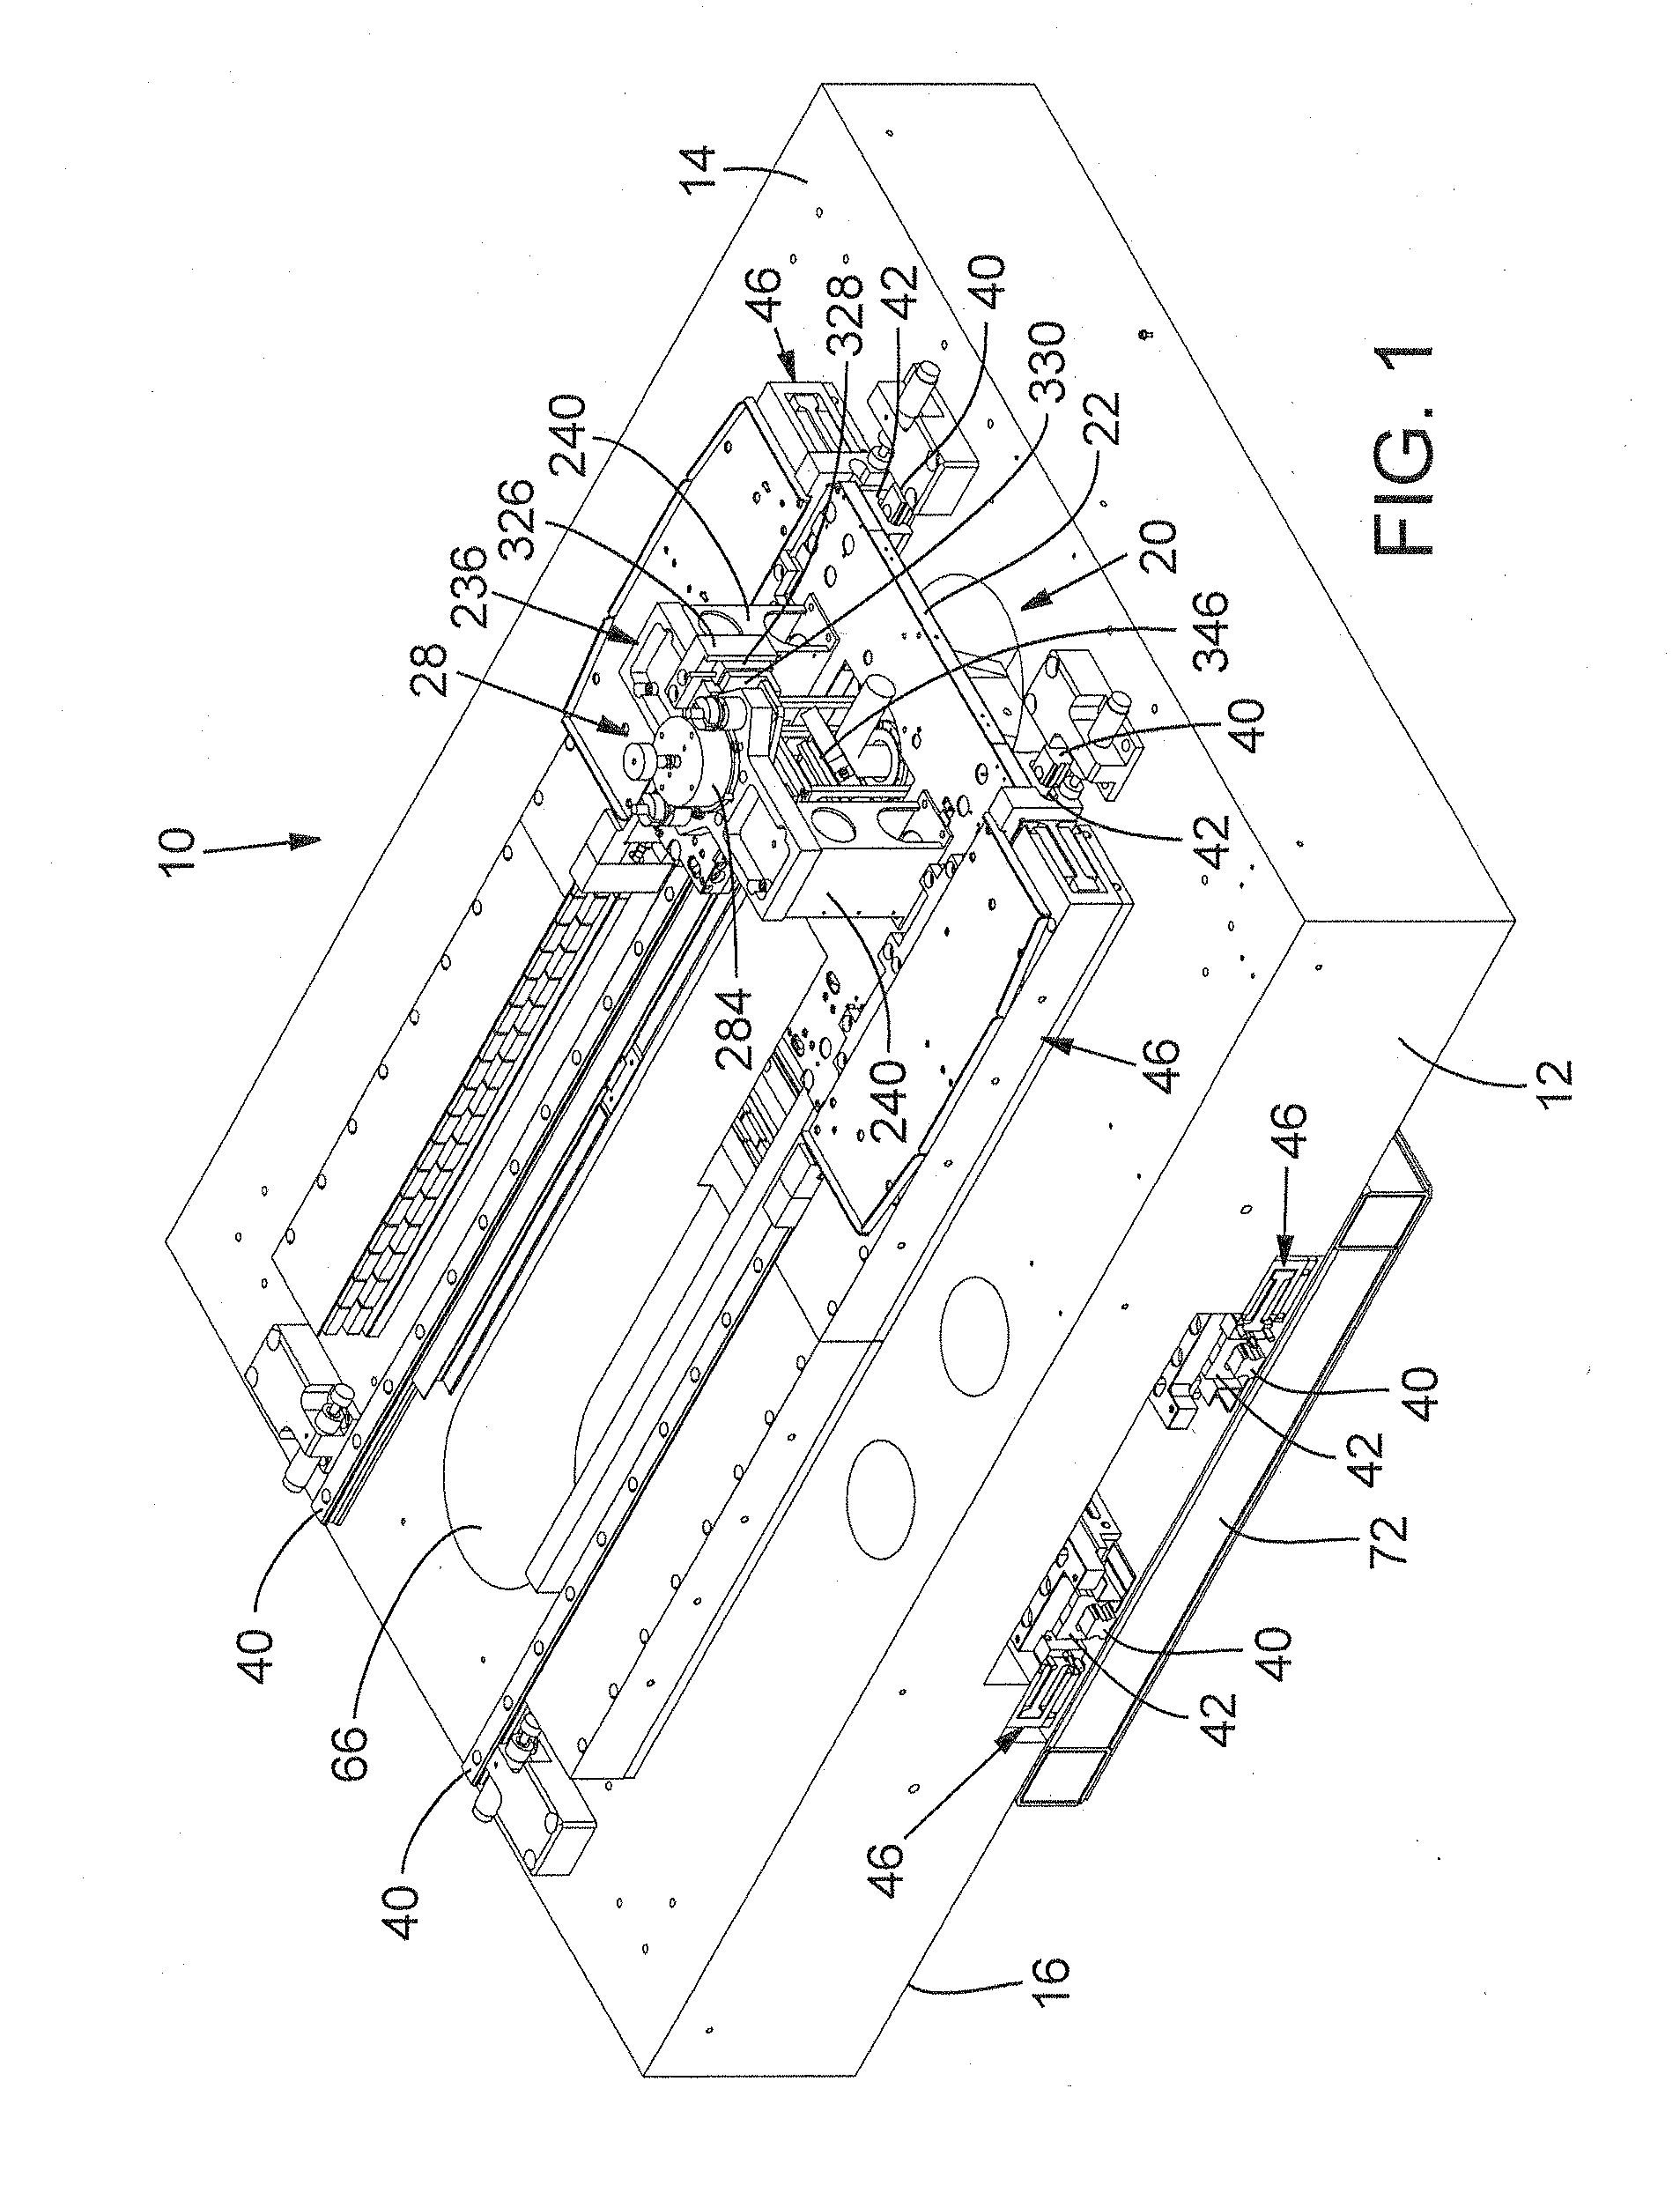 Decoupled, multiple stage positioning system